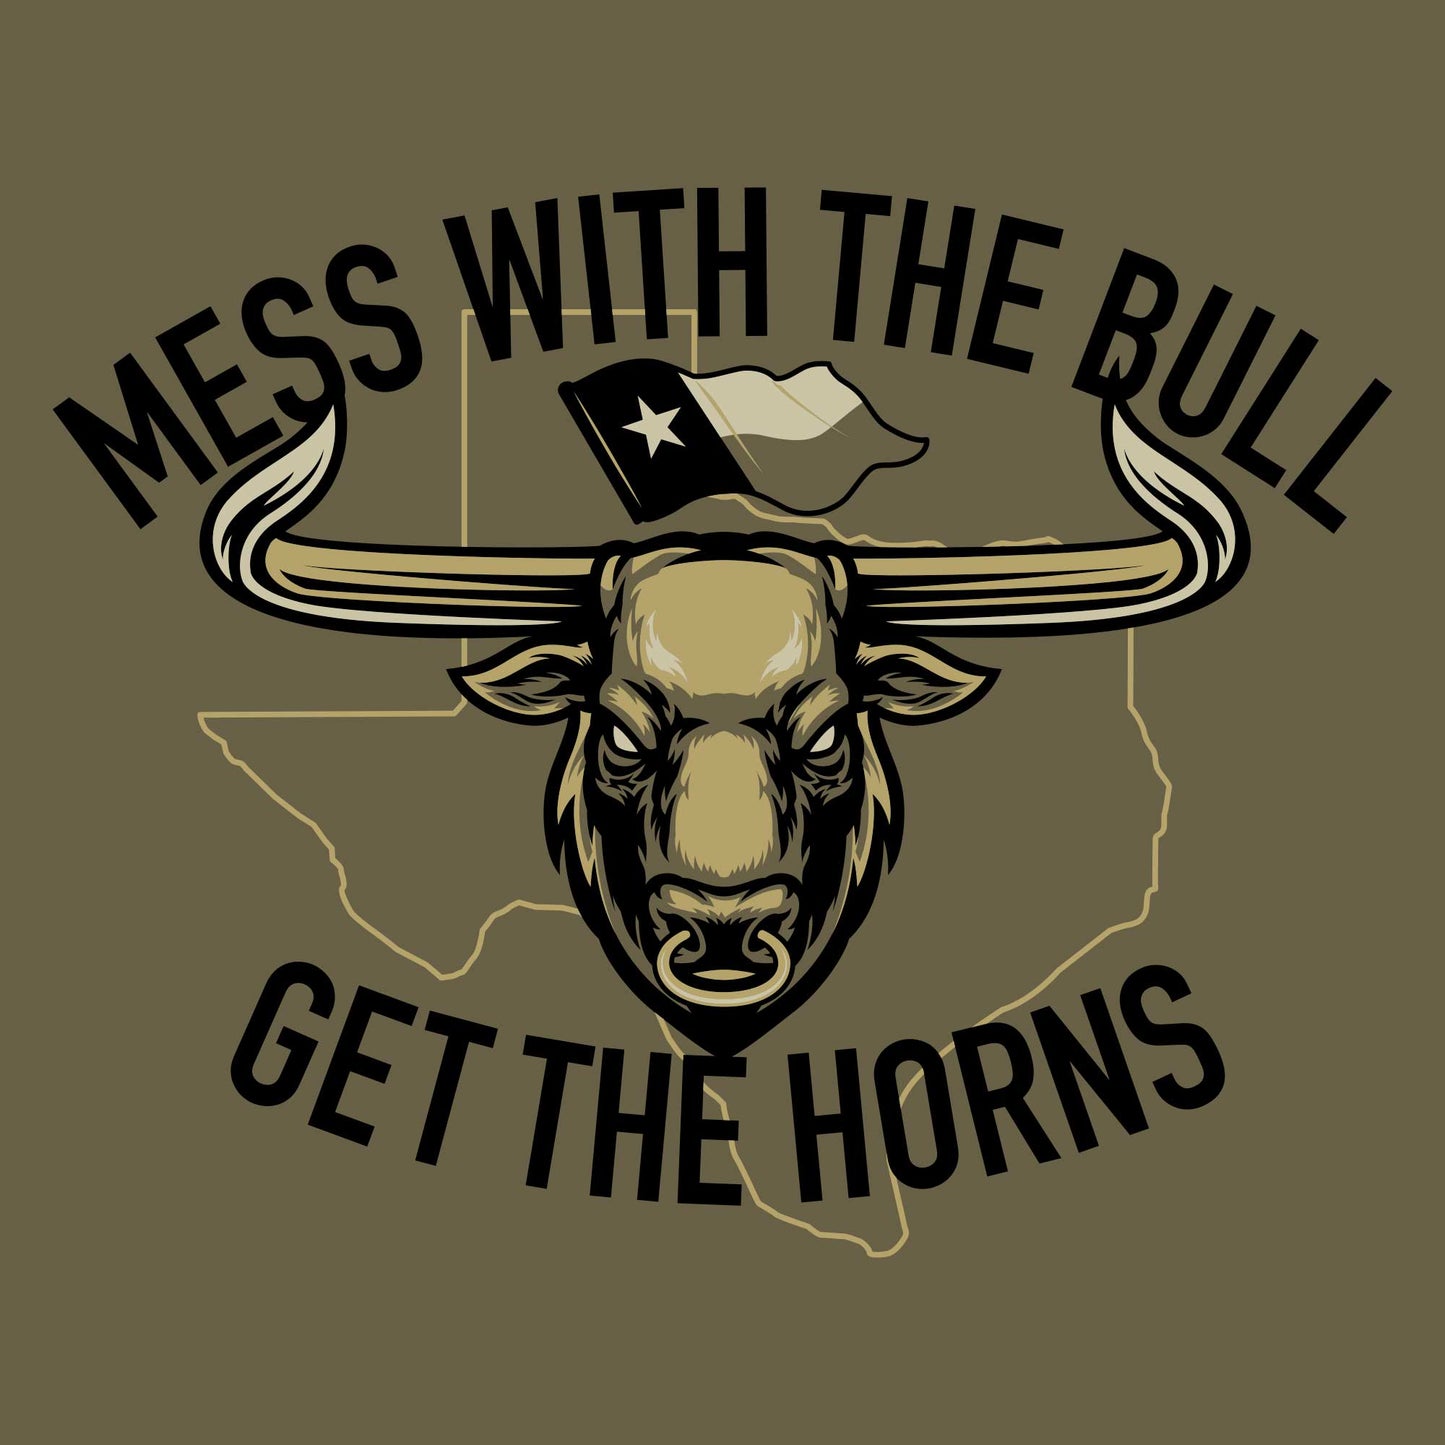 Mess with the Bull